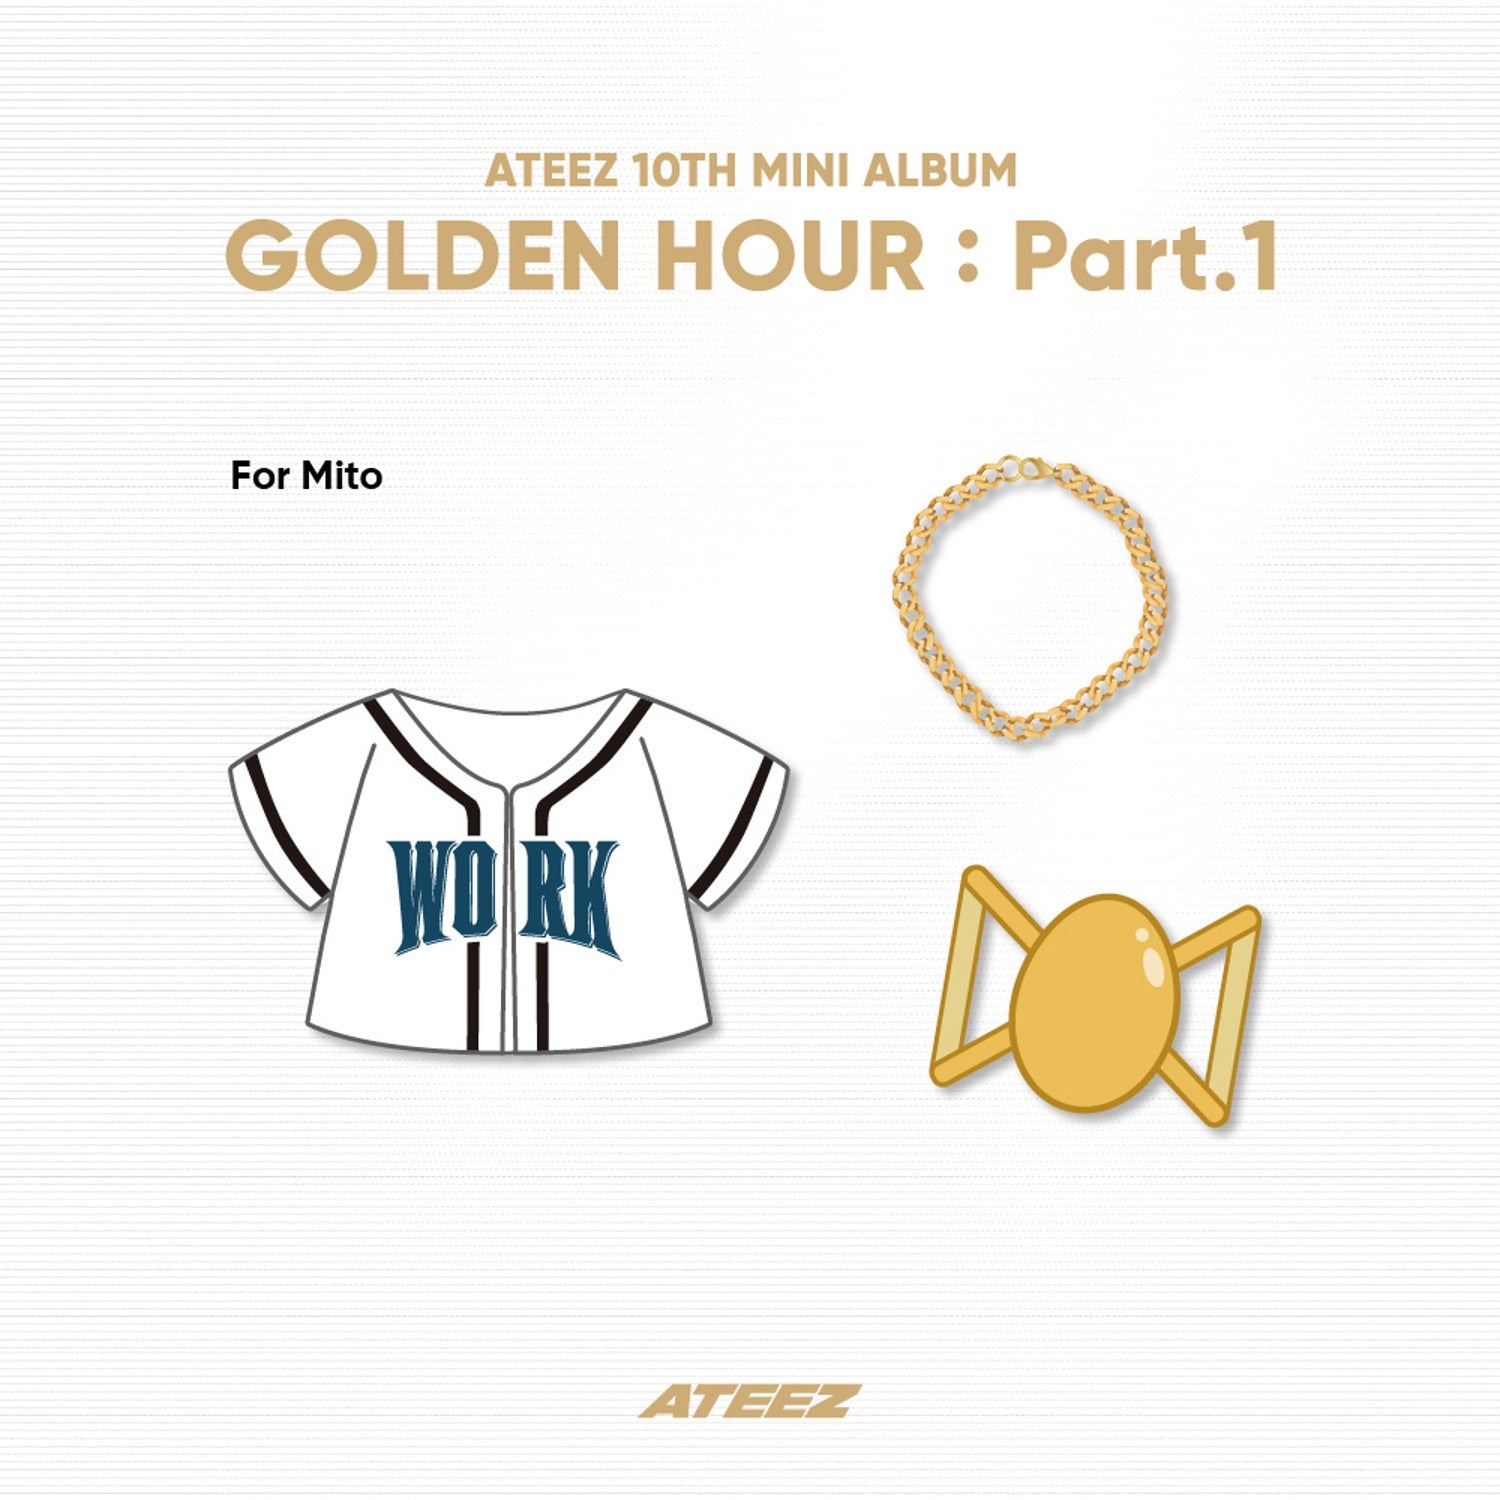 ATEEZ - GOLDEN HOUR : PART.1 OFFICIAL MD MITO WORK SET - COKODIVE